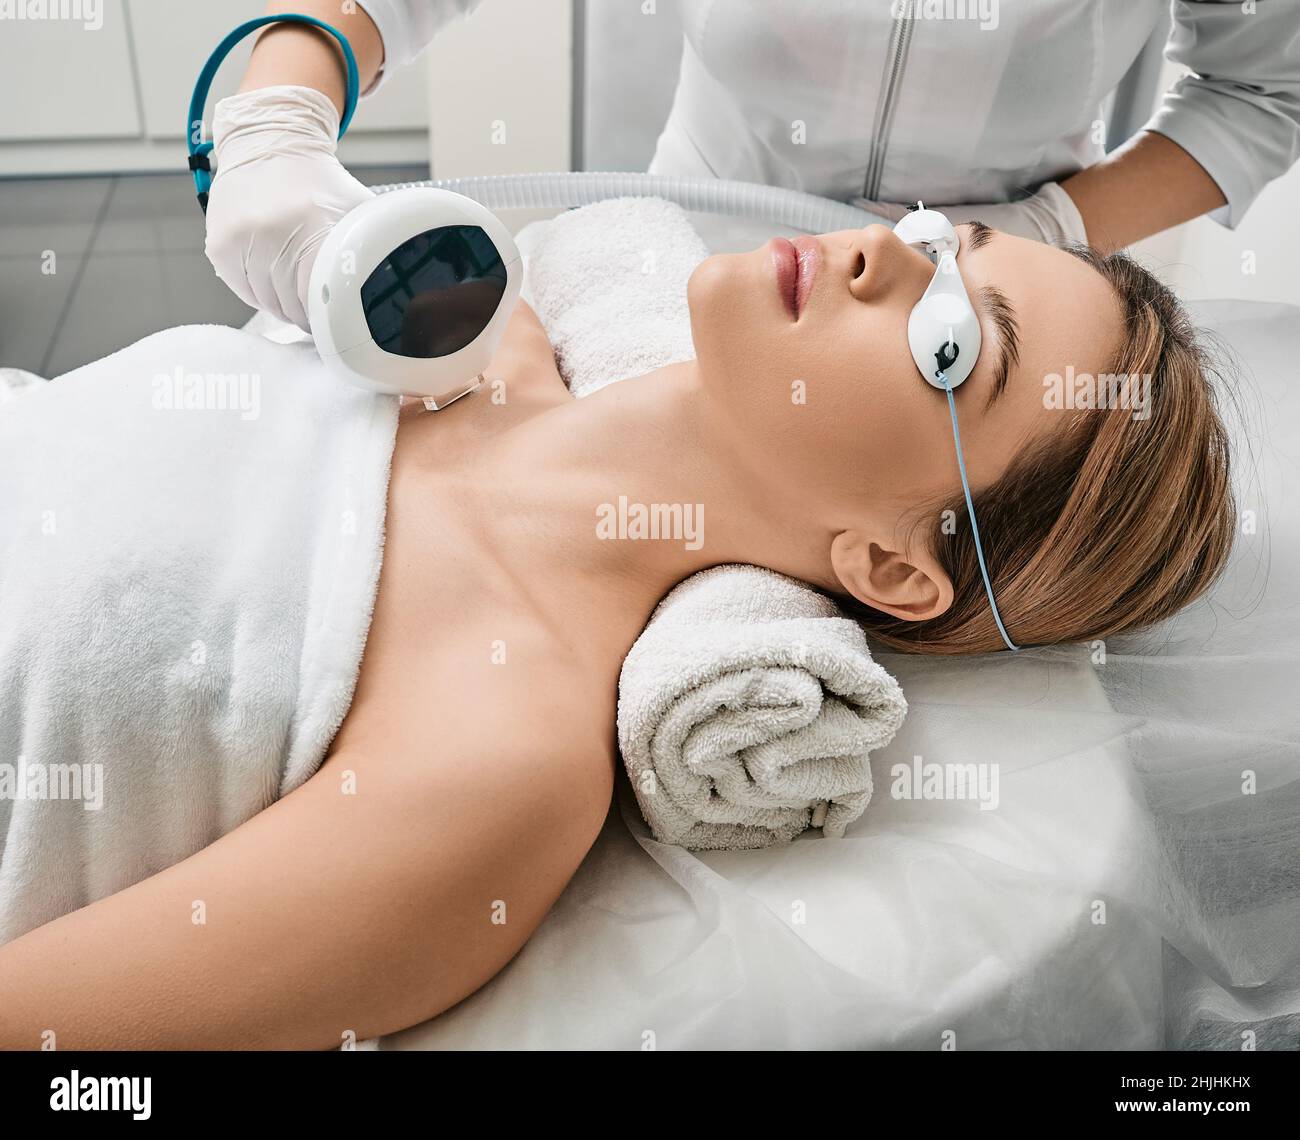 Removal of brown spots and freckles on a woman's body and neckline at cosmetology using machine with intense pulsed light IPL technology Stock Photo